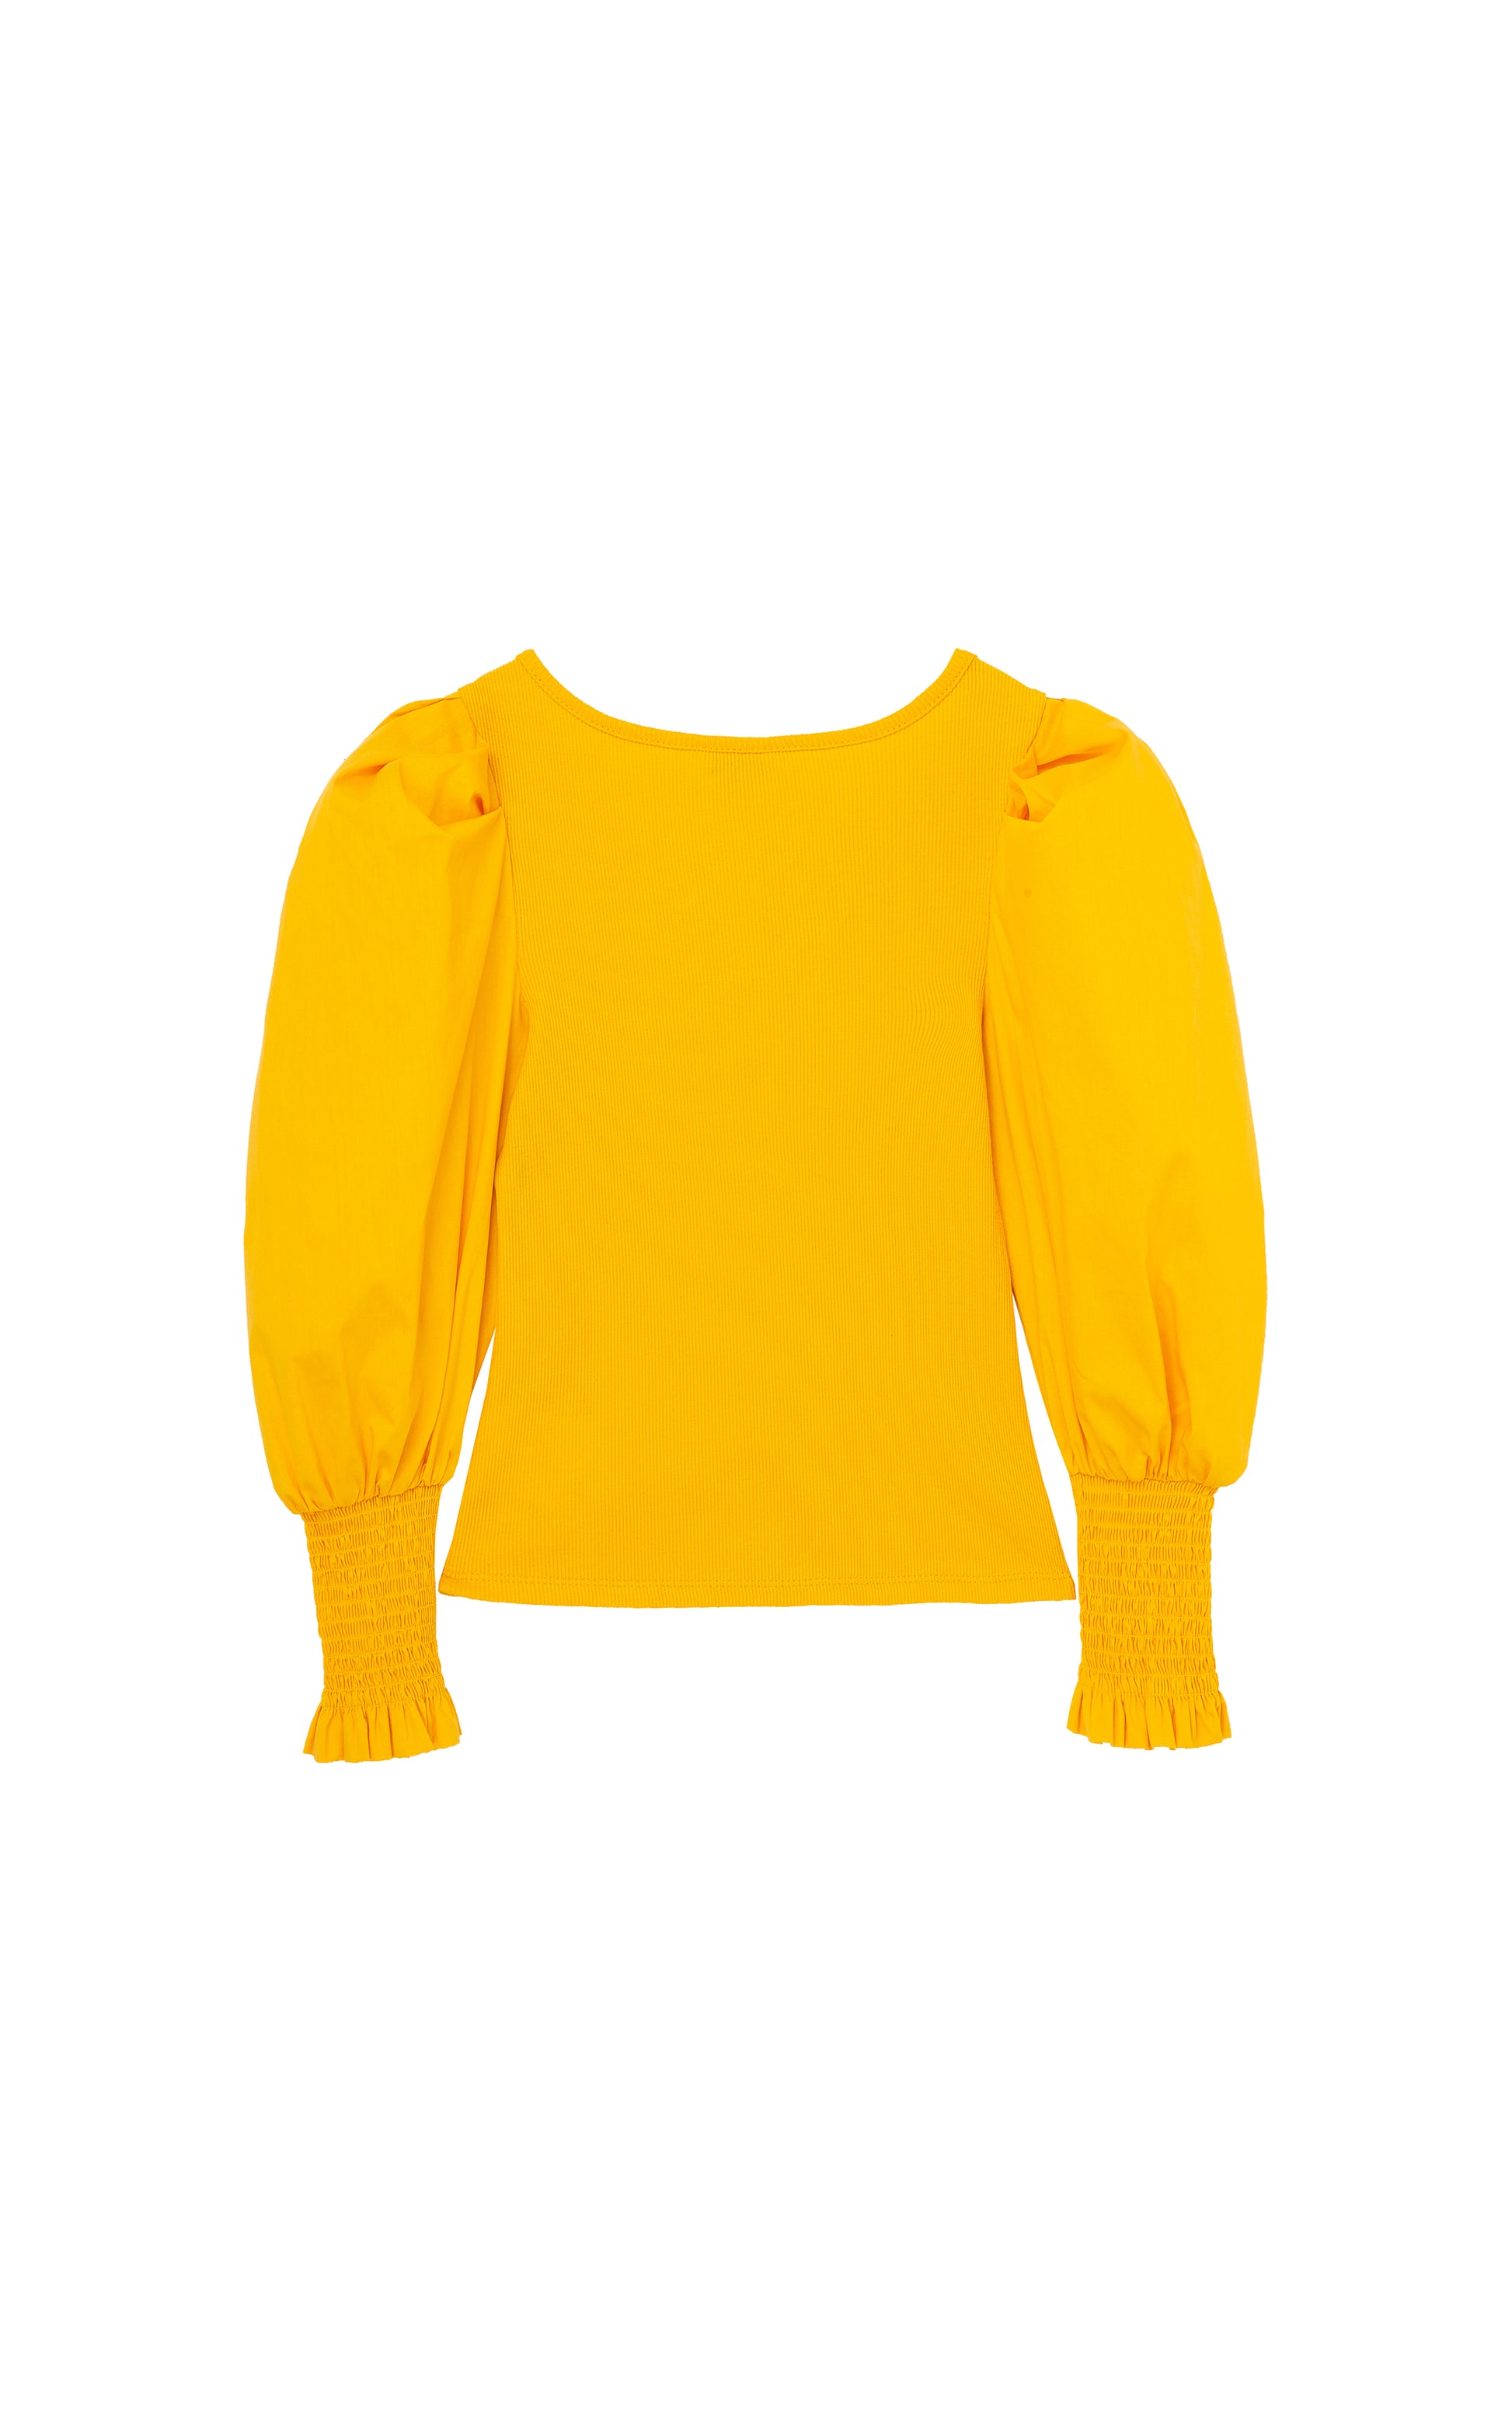 BACK OF YELLOW  LONG-SLEEVE TOP WITH FOUR BUTTONS AT THE COLLAR, PUFFY SLEEVES, AND SMOCKED CUFFS